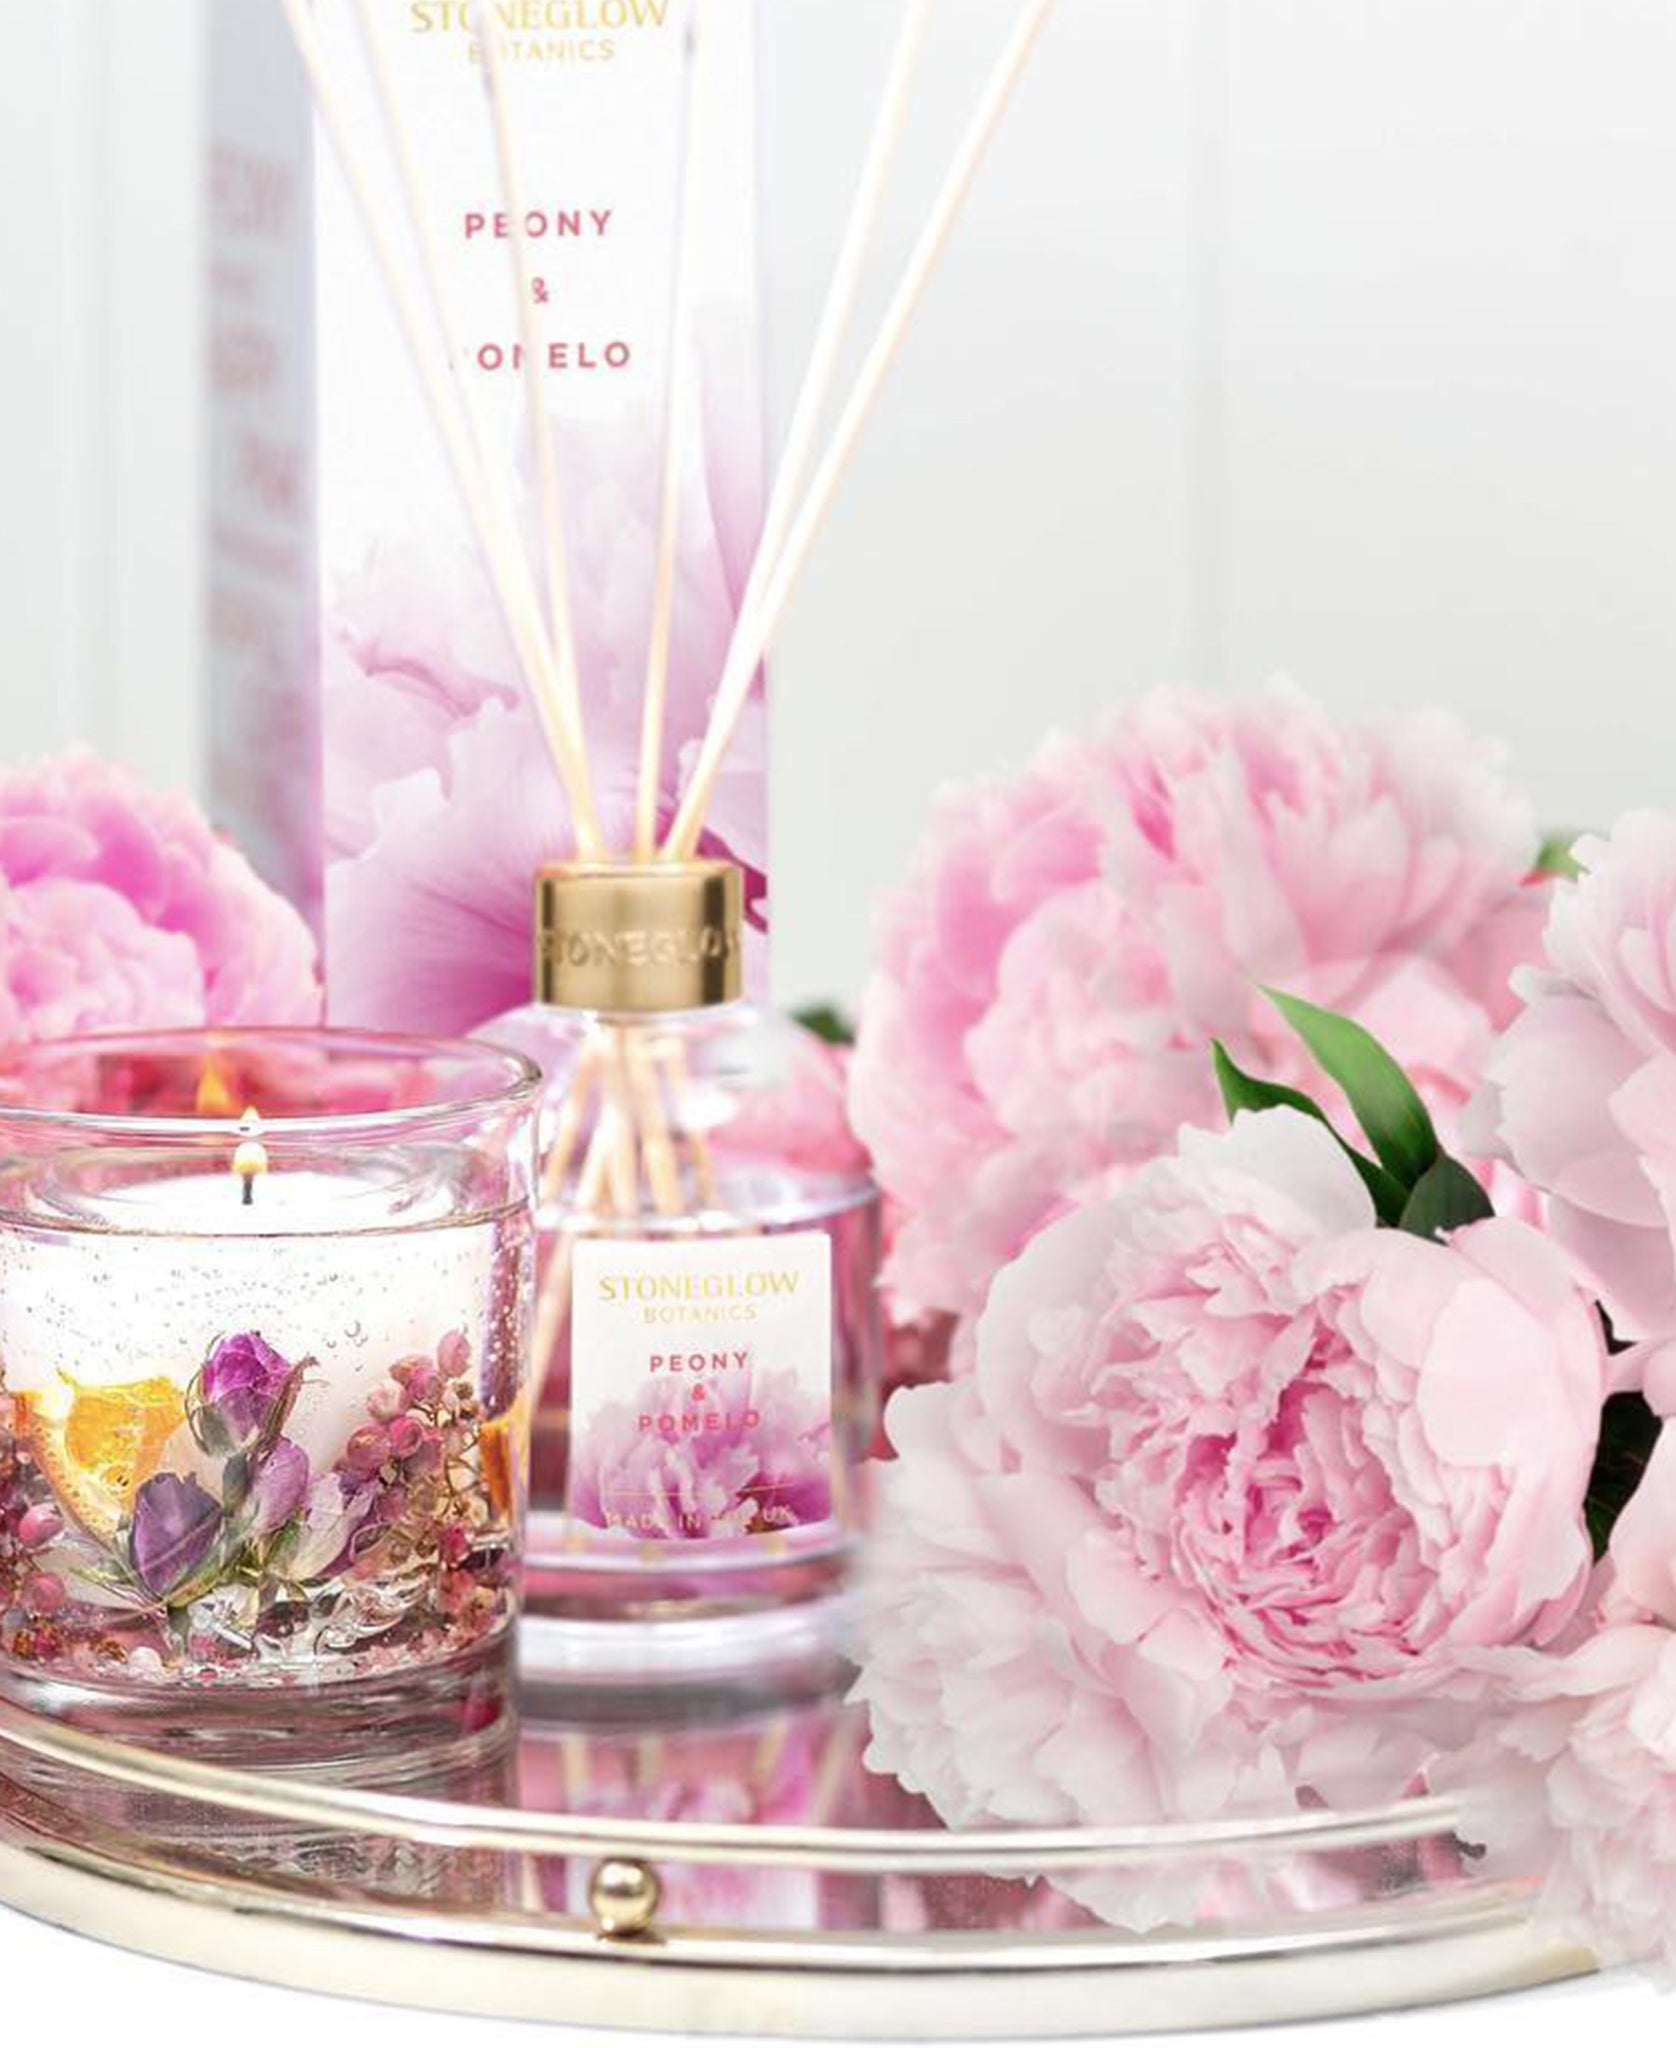 Stoneglow Rose And Peony Diffusser